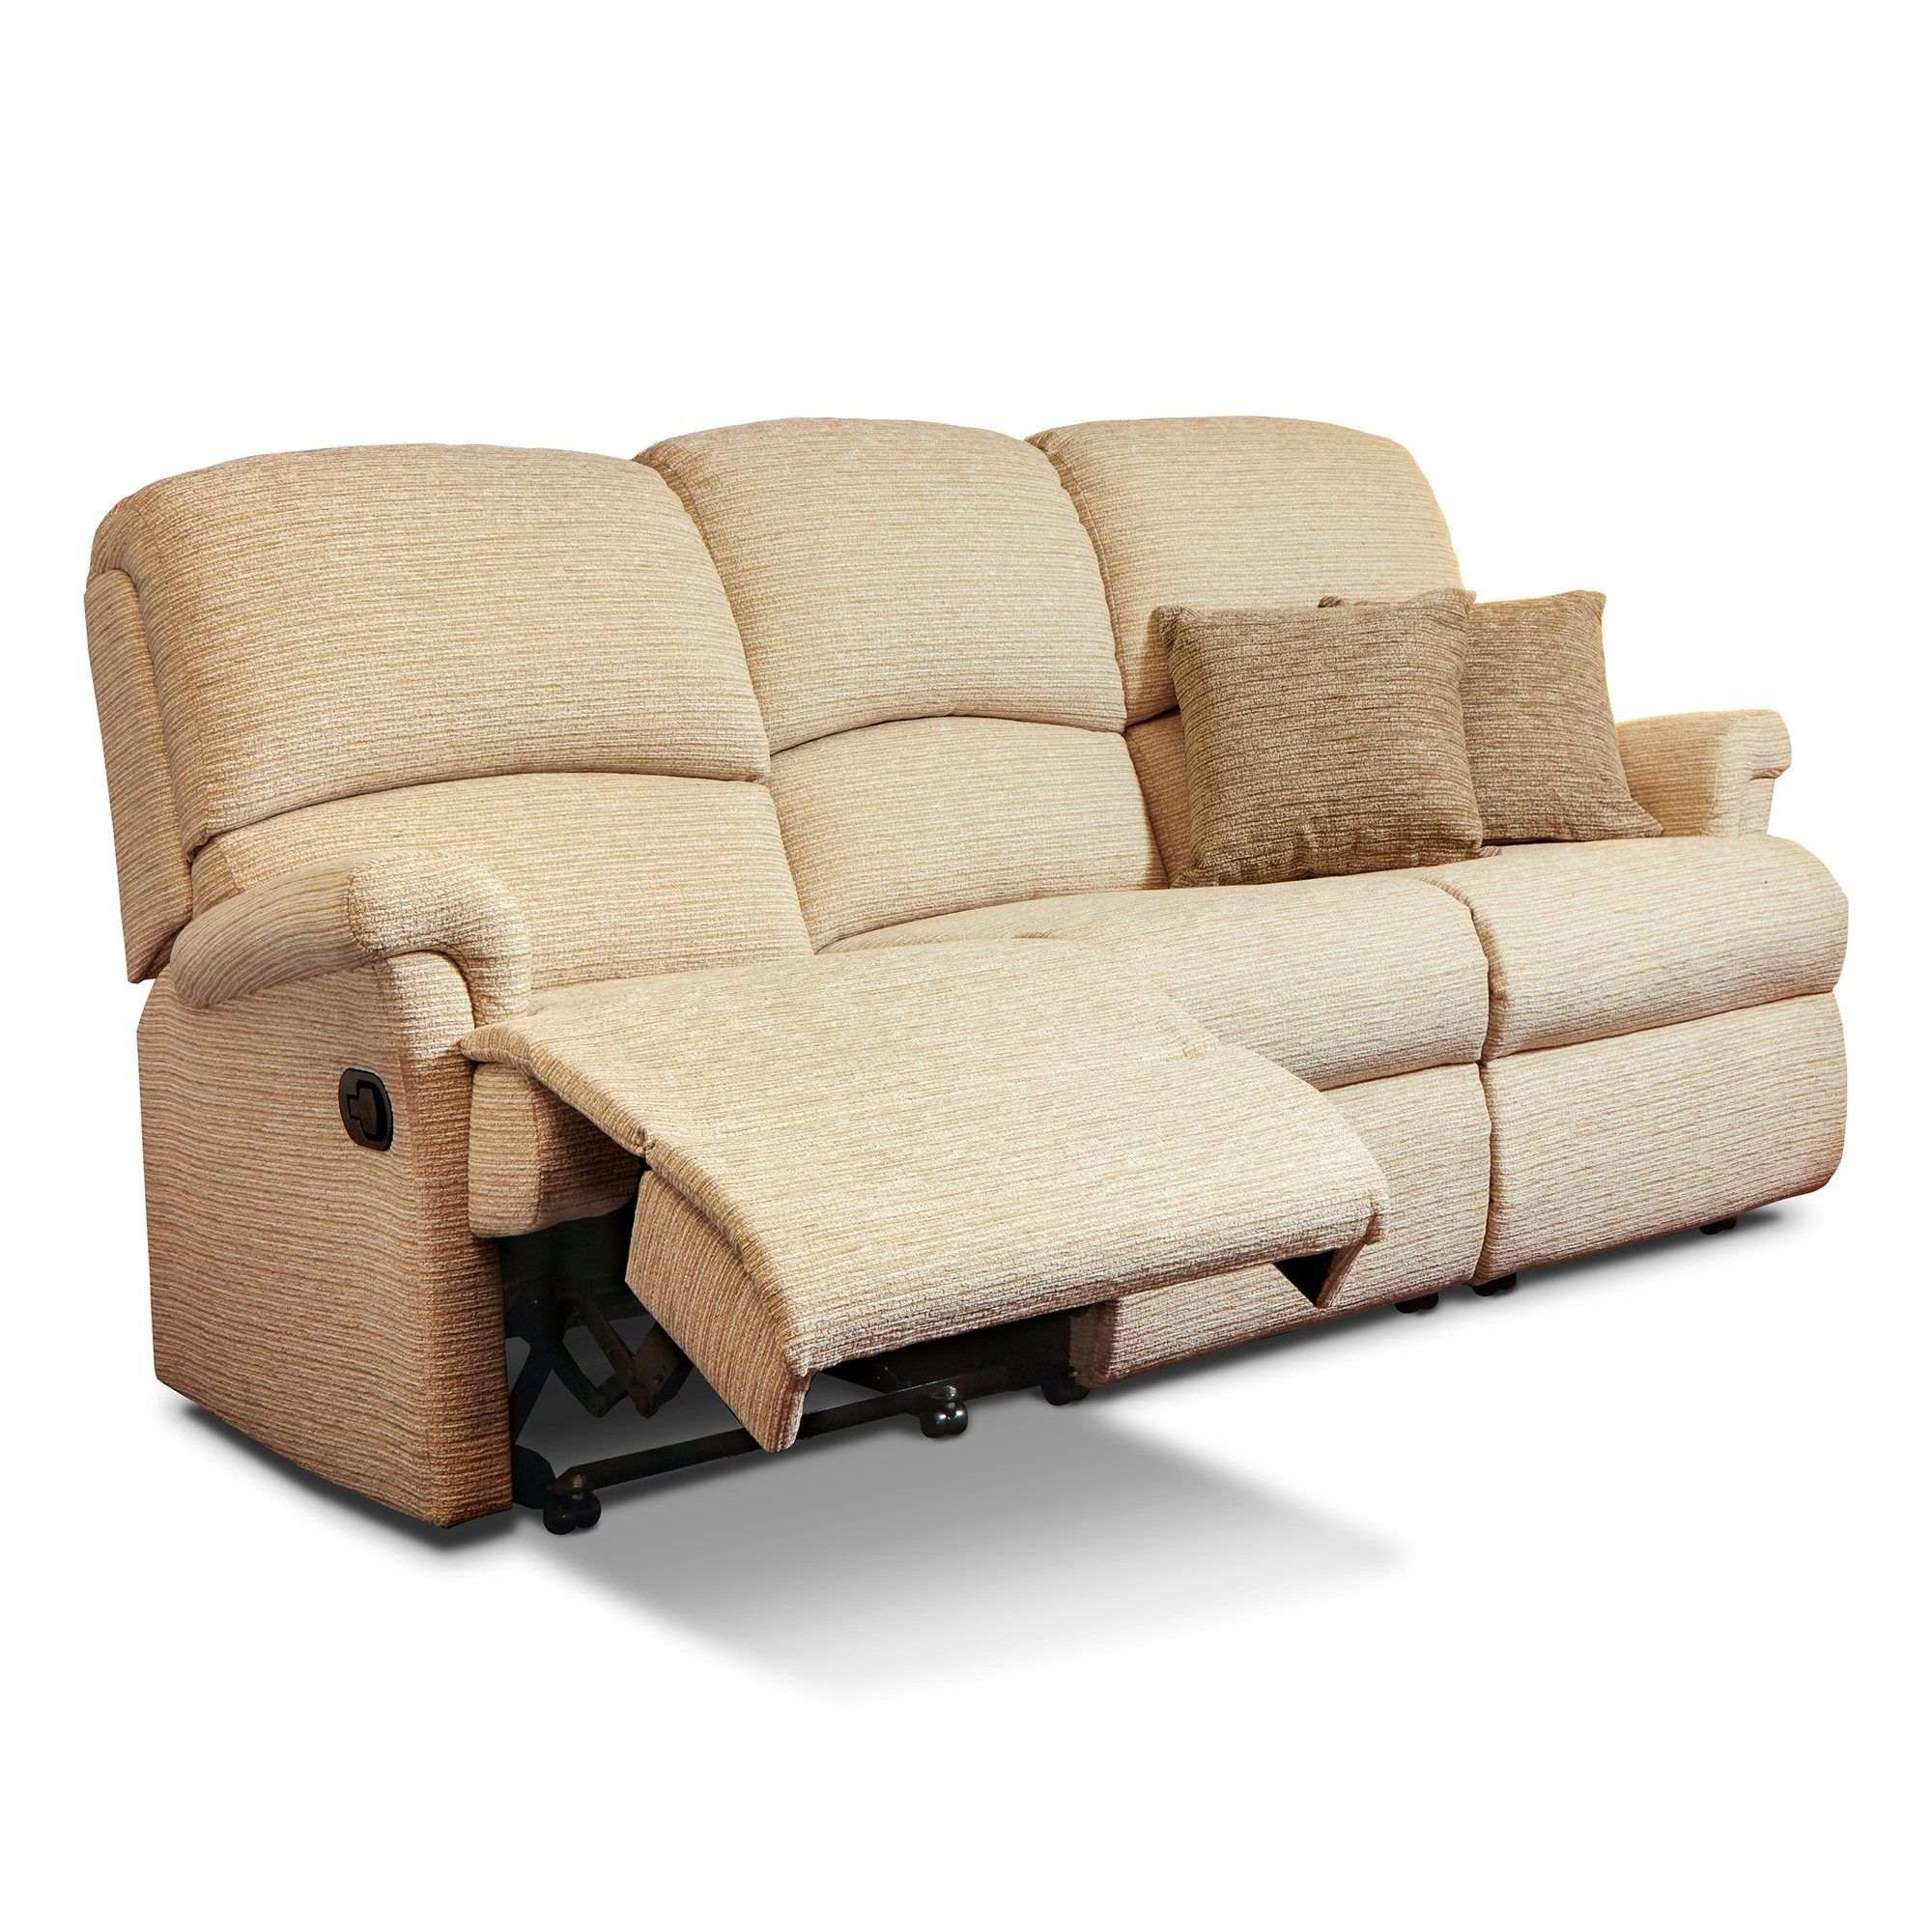 Sherborne Nevada Reclining 3 Seater Sofa (fabric) – Queenstreet Carpets Throughout Traditional 3 Seater Sofas (View 19 of 20)